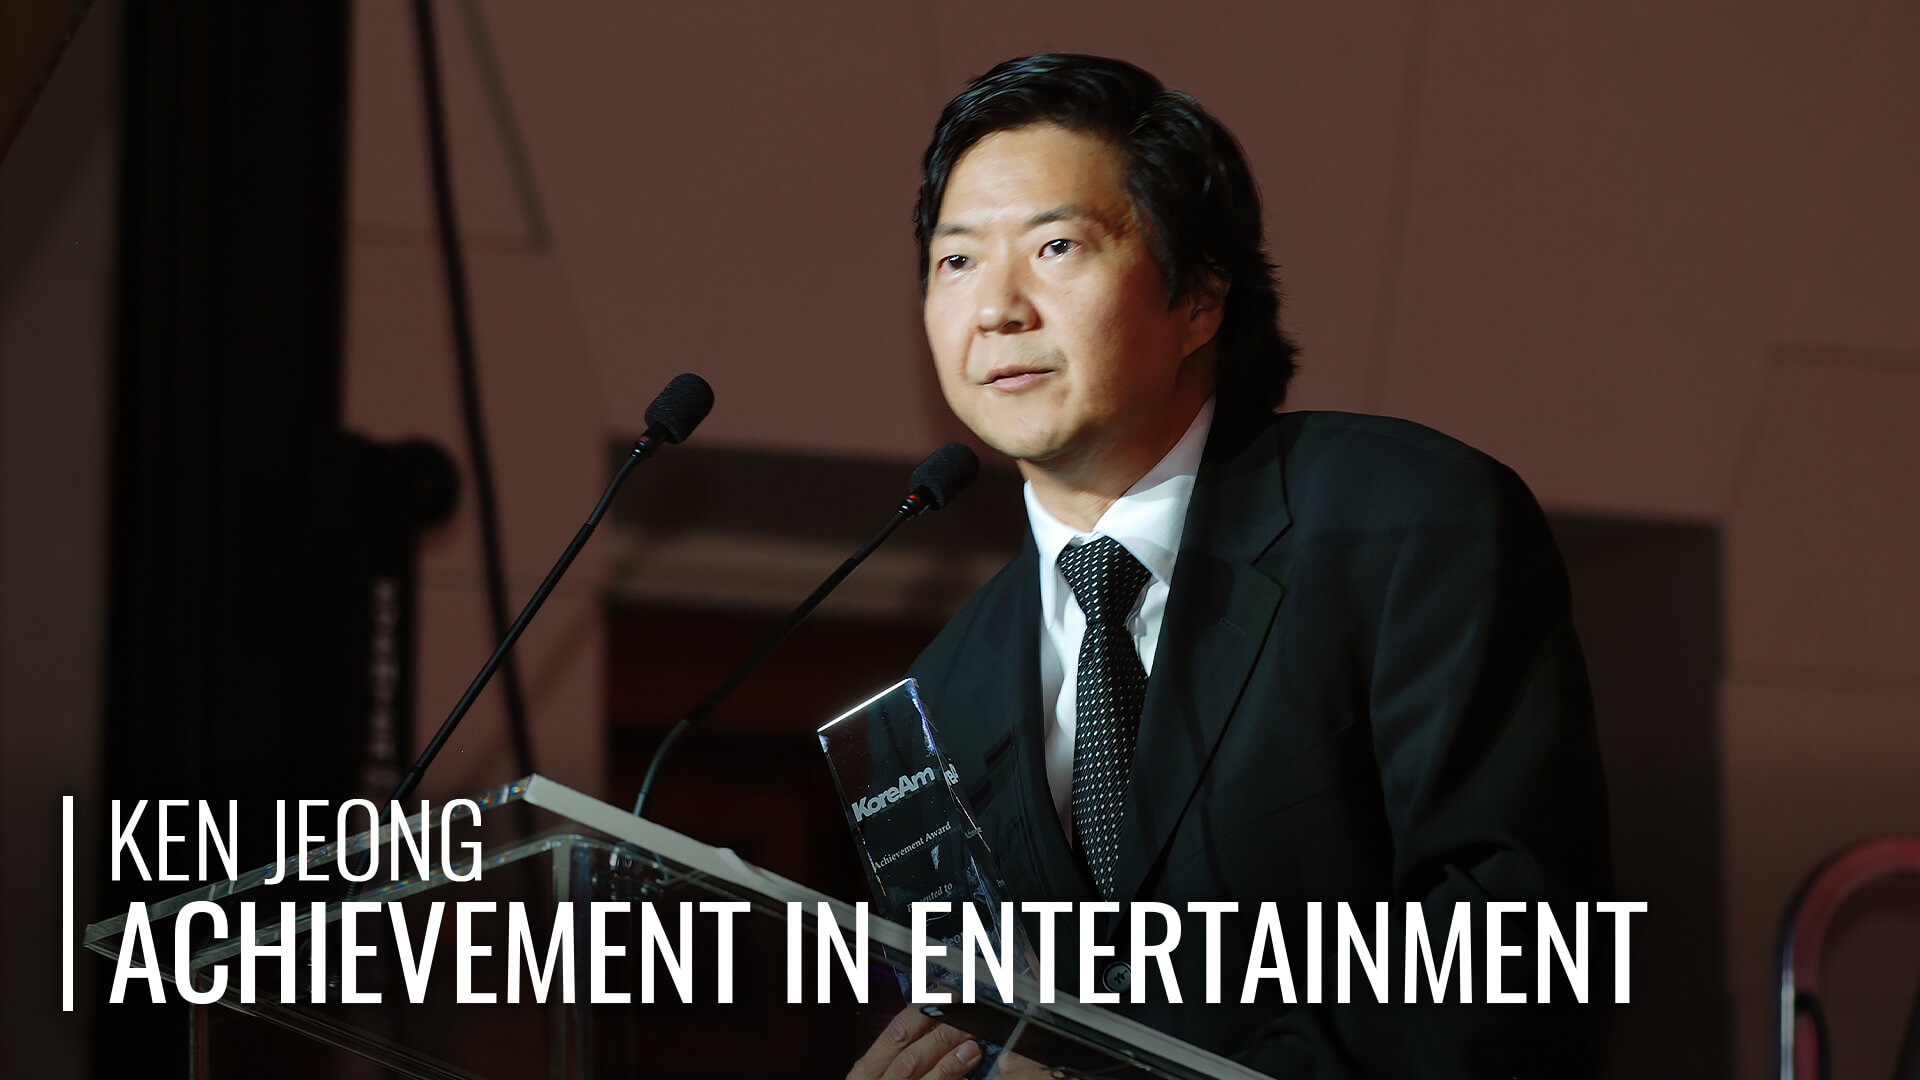 Ken Jeong Wins Achievement in Film & Television at the 2009 Unforgettable Gala